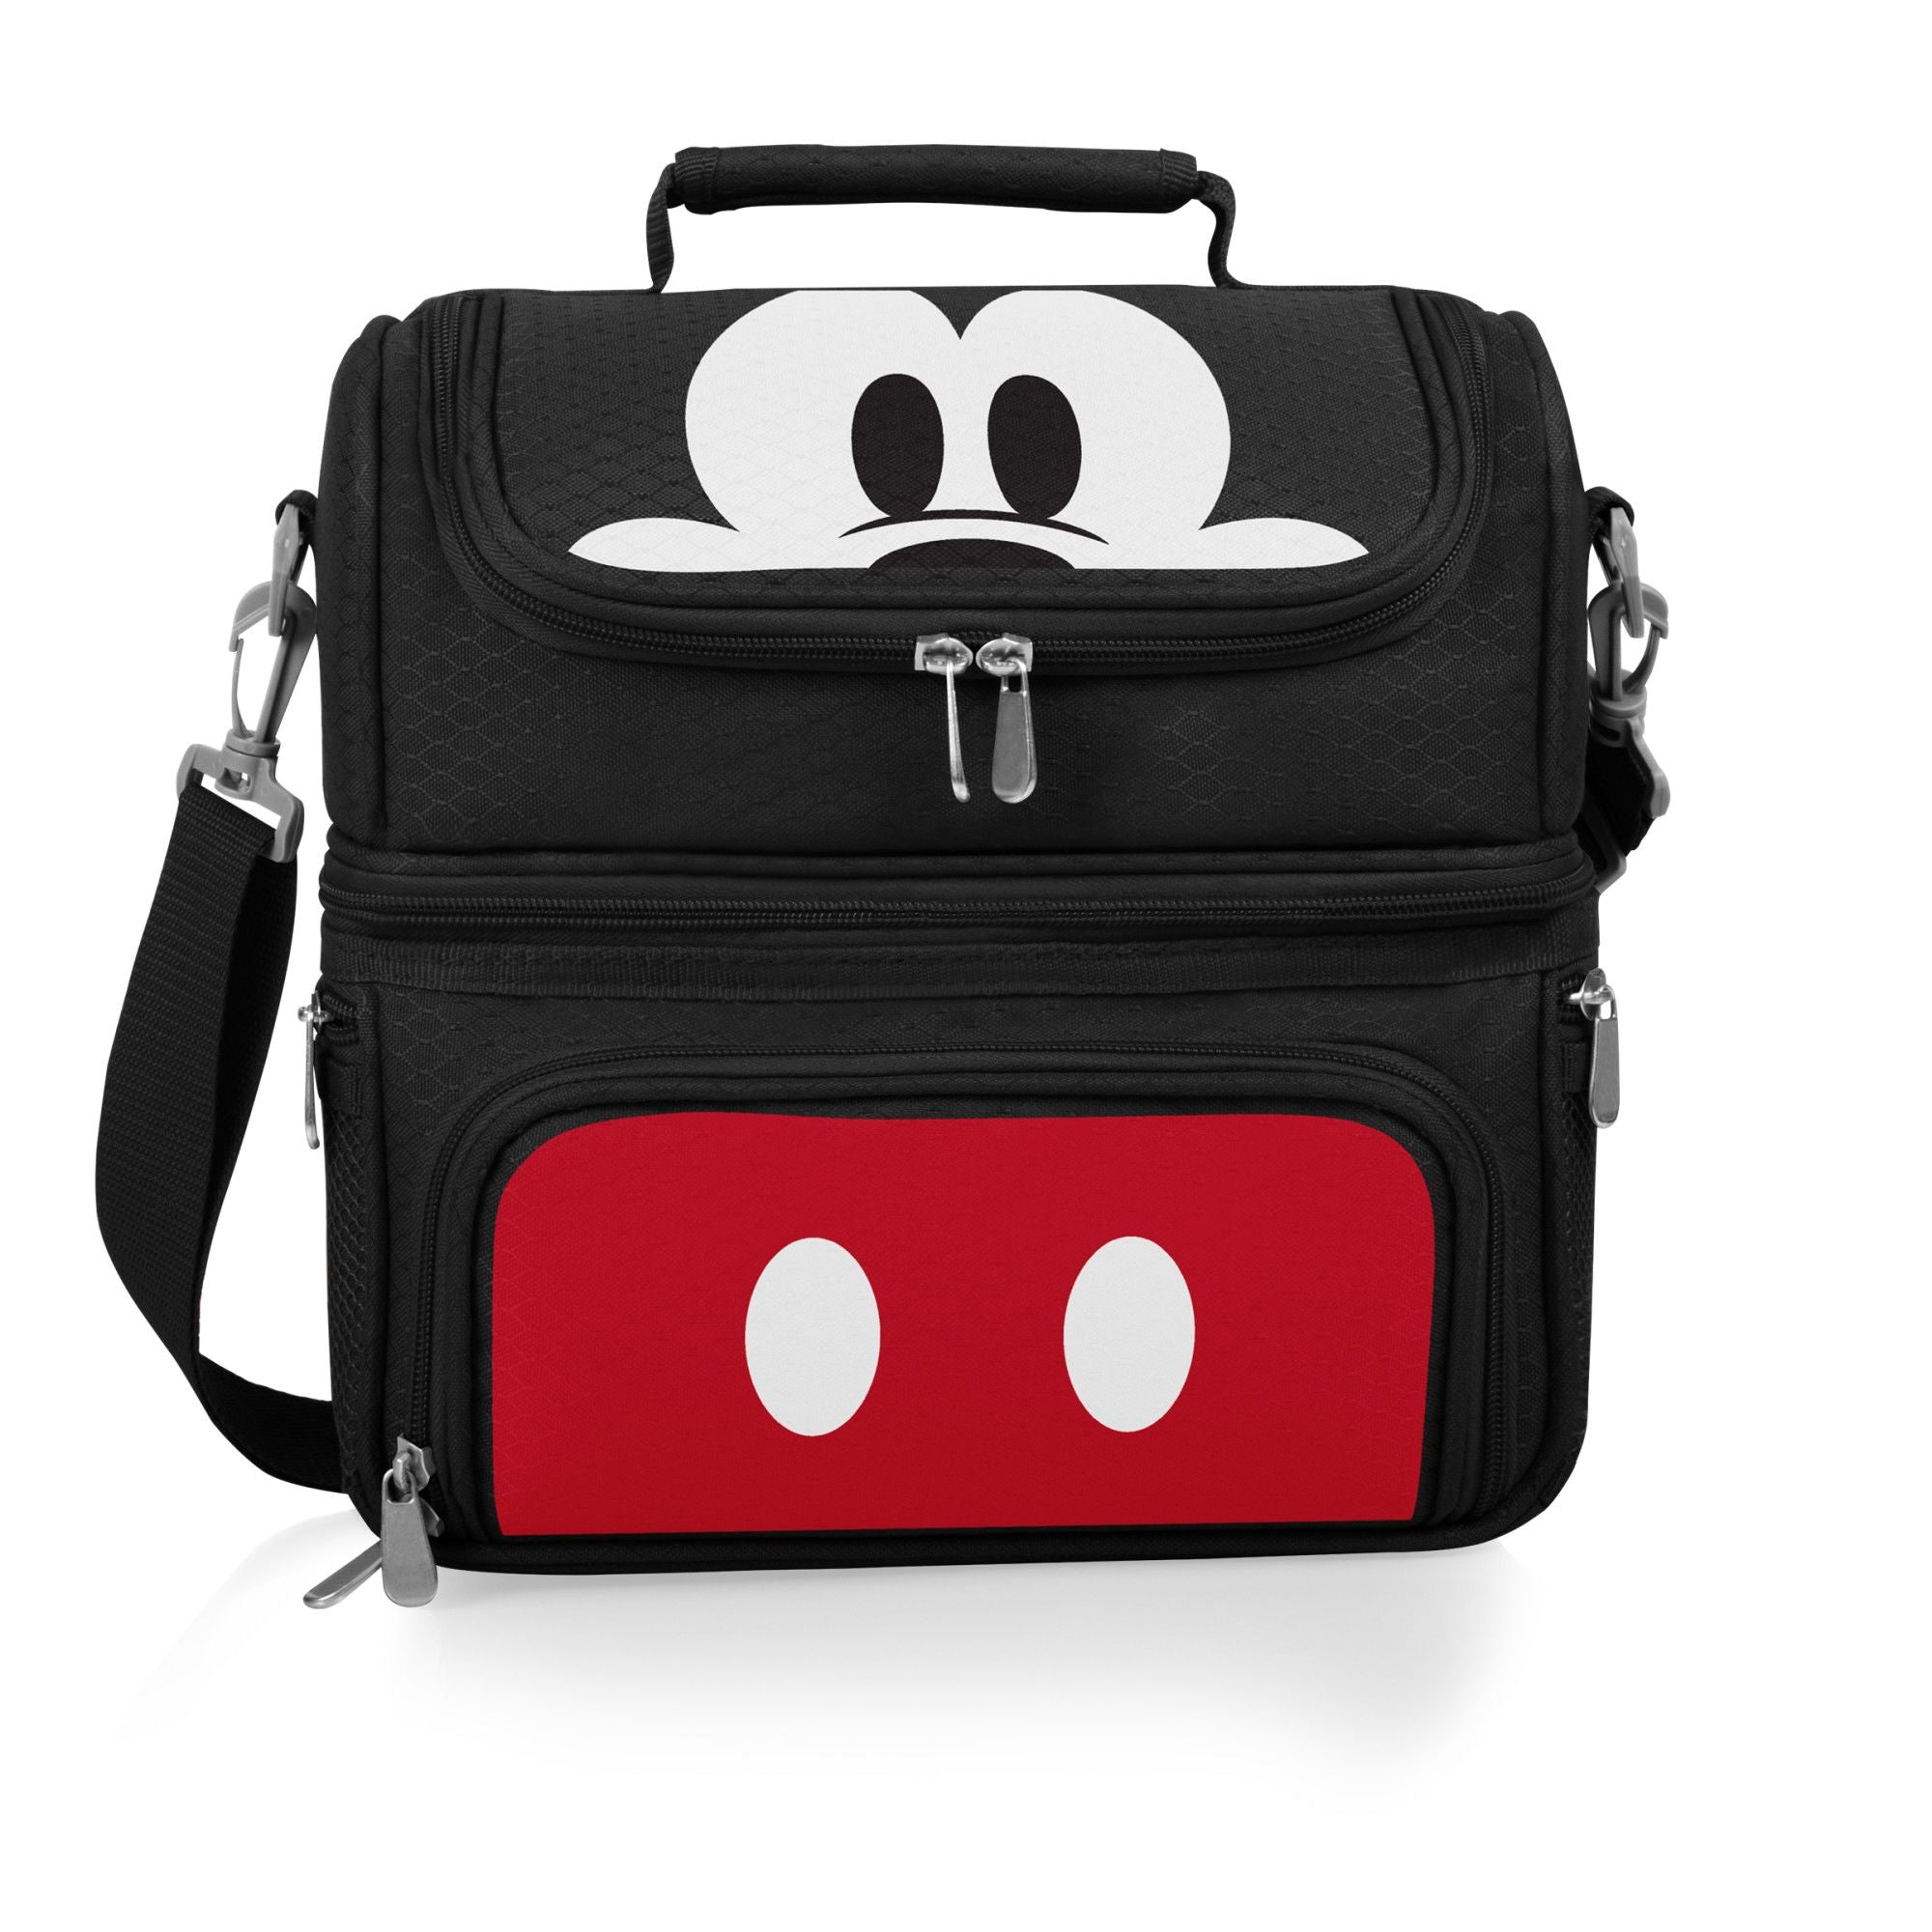 Mickey Mouse Lunch Box | shopDisney